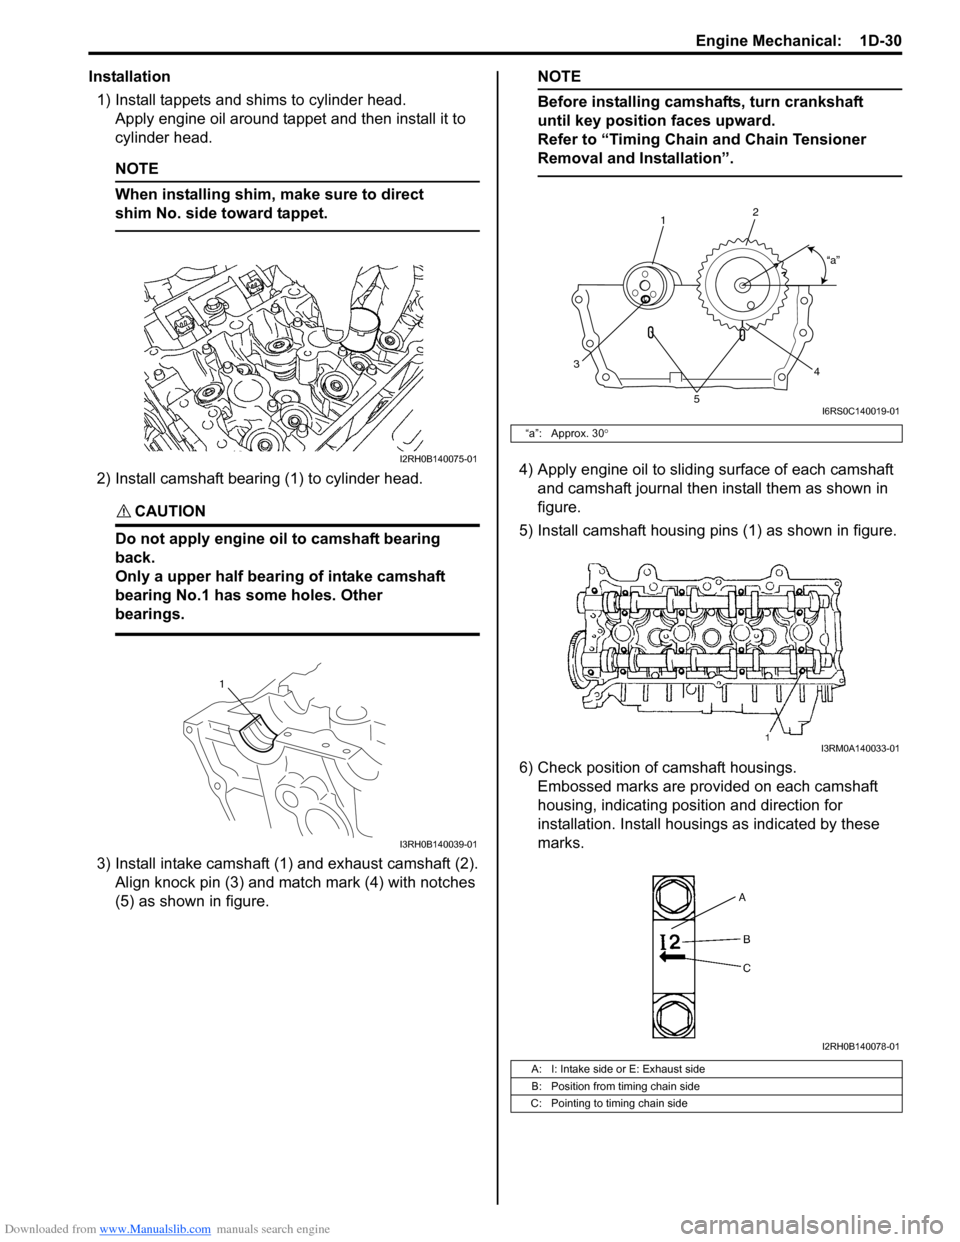 SUZUKI SWIFT 2006 2.G Service User Guide Downloaded from www.Manualslib.com manuals search engine Engine Mechanical:  1D-30
Installation1) Install tappets and shims to cylinder head. Apply engine oil around tappet and then install it to 
cyl